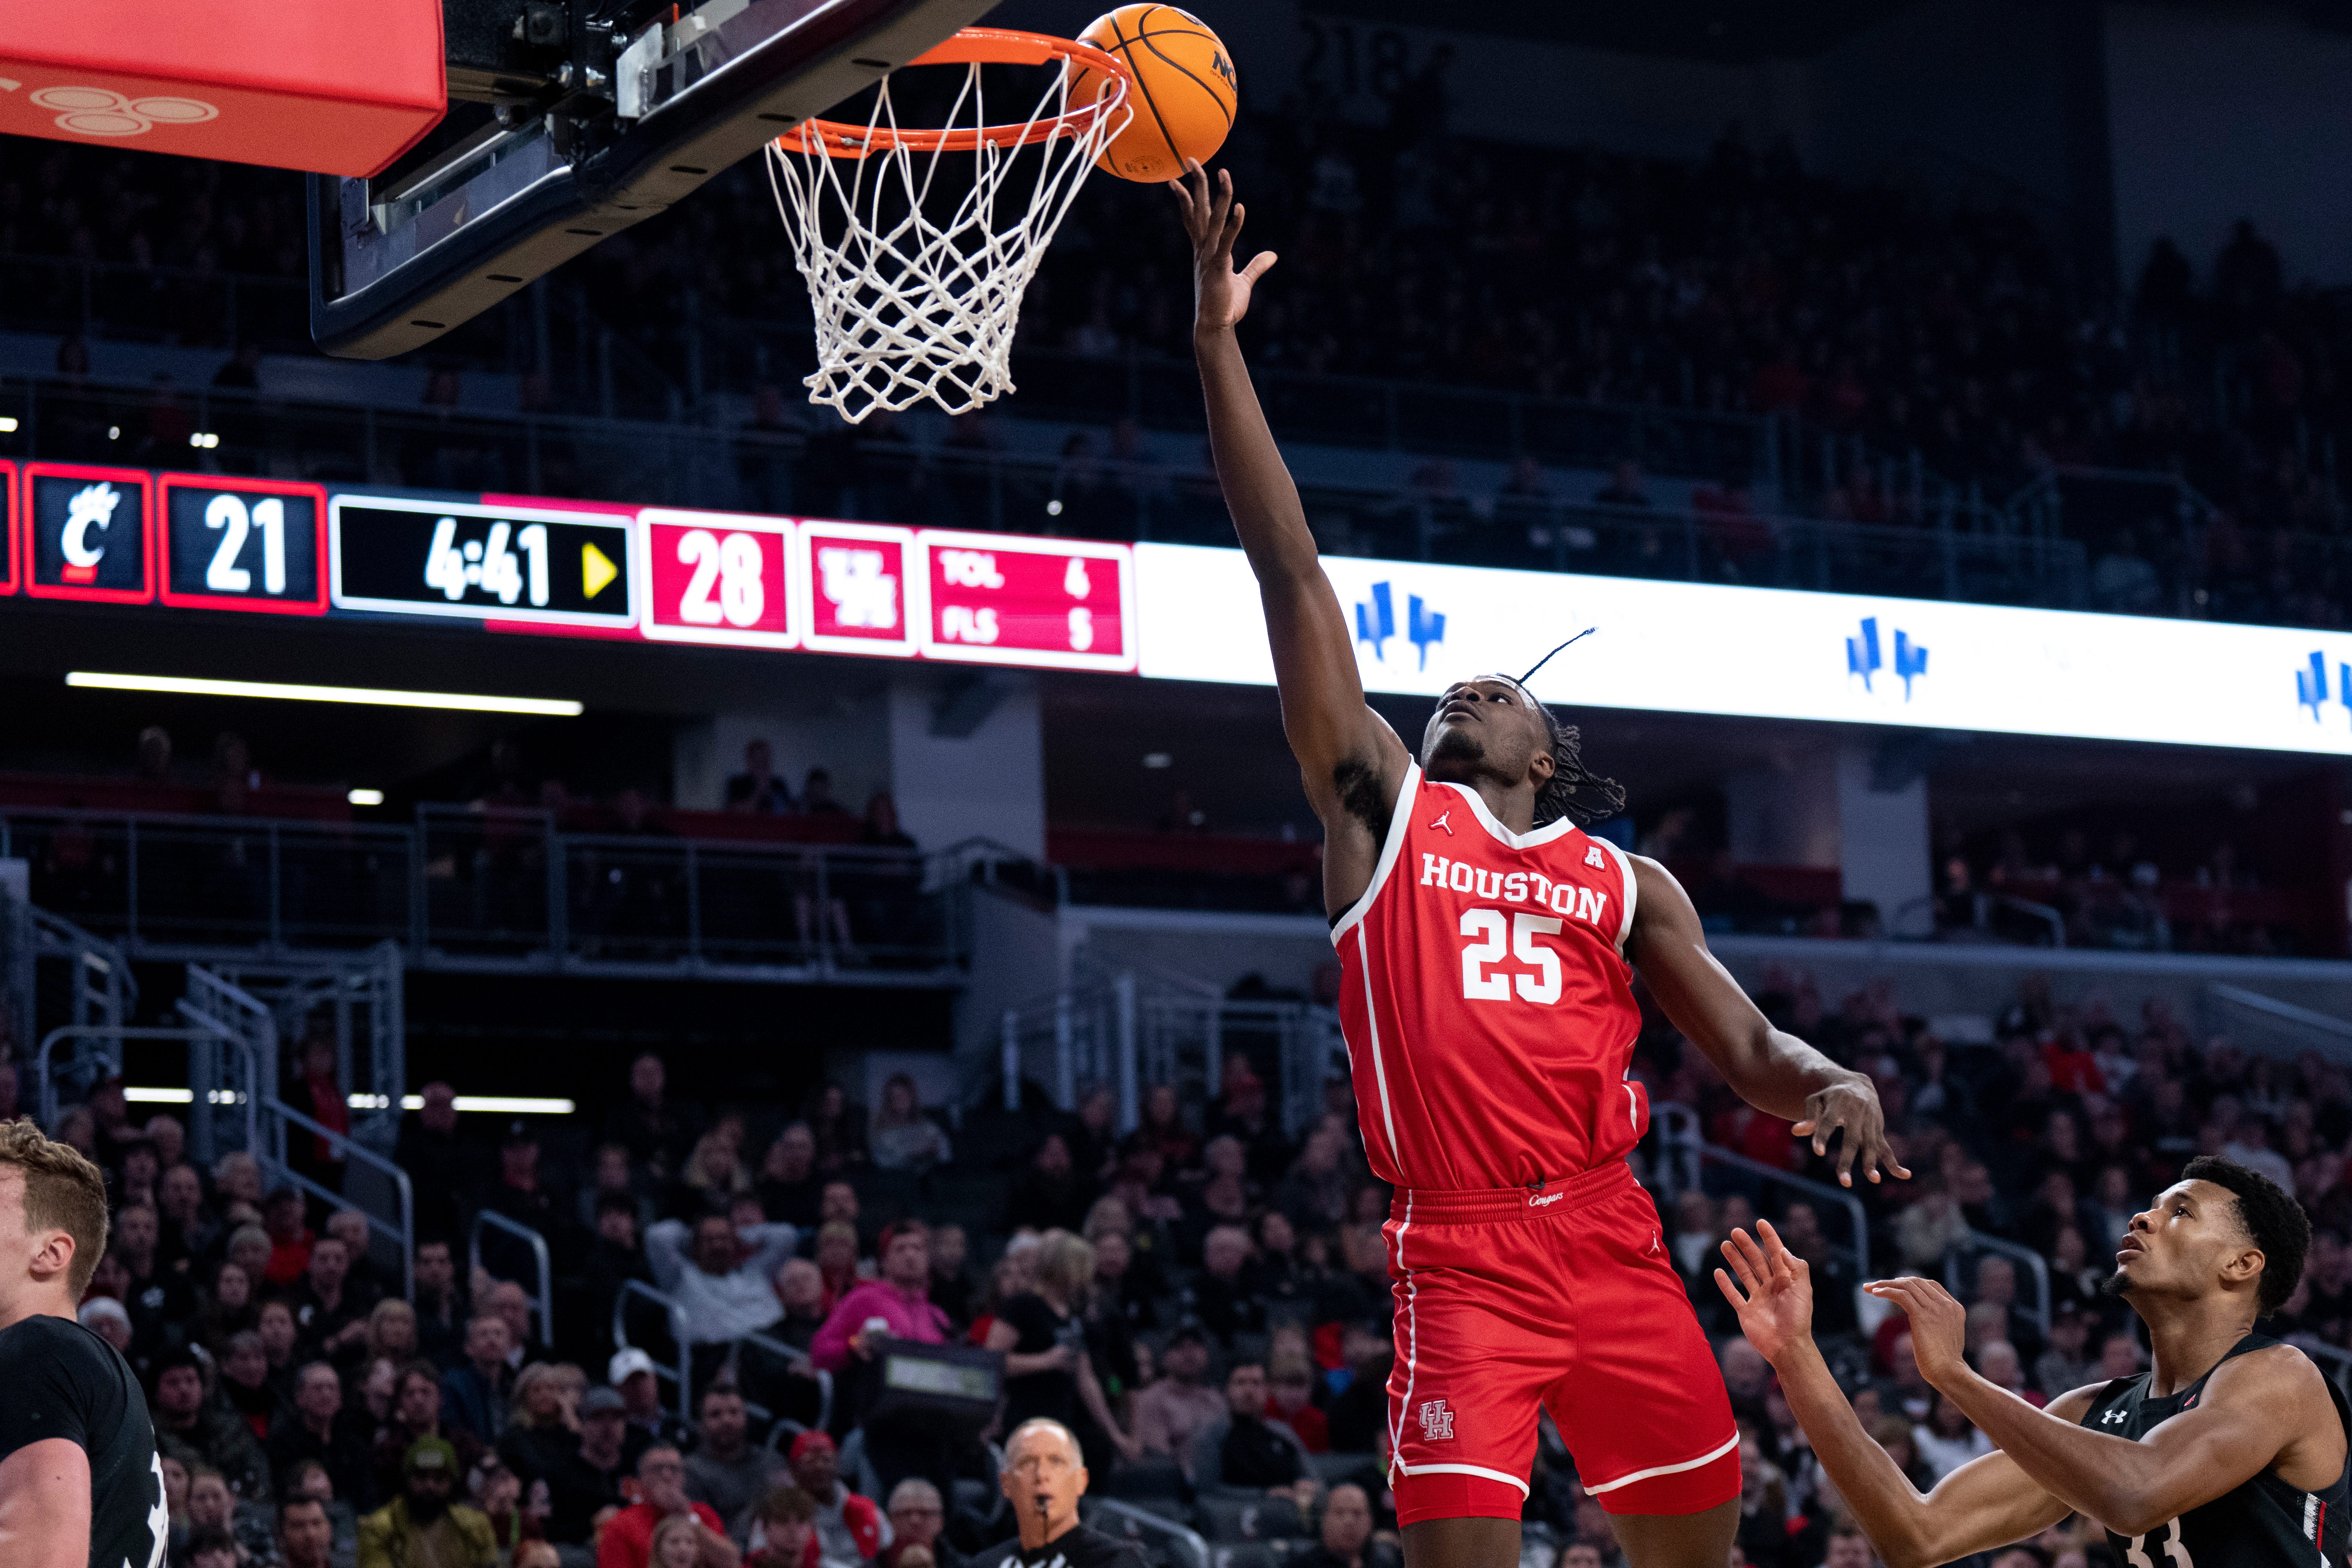 Houston Cougars forward Jarace Walker lays the ball up as Cincinnati Bearcats forward Ody Oguama looks on in the first half of the NCAA men s basketball game between the Cincinnati Bearcats and the Houston Cougars at Fifth Third Arena in Cincinnati on Sunday, Jan. 8, 2023.